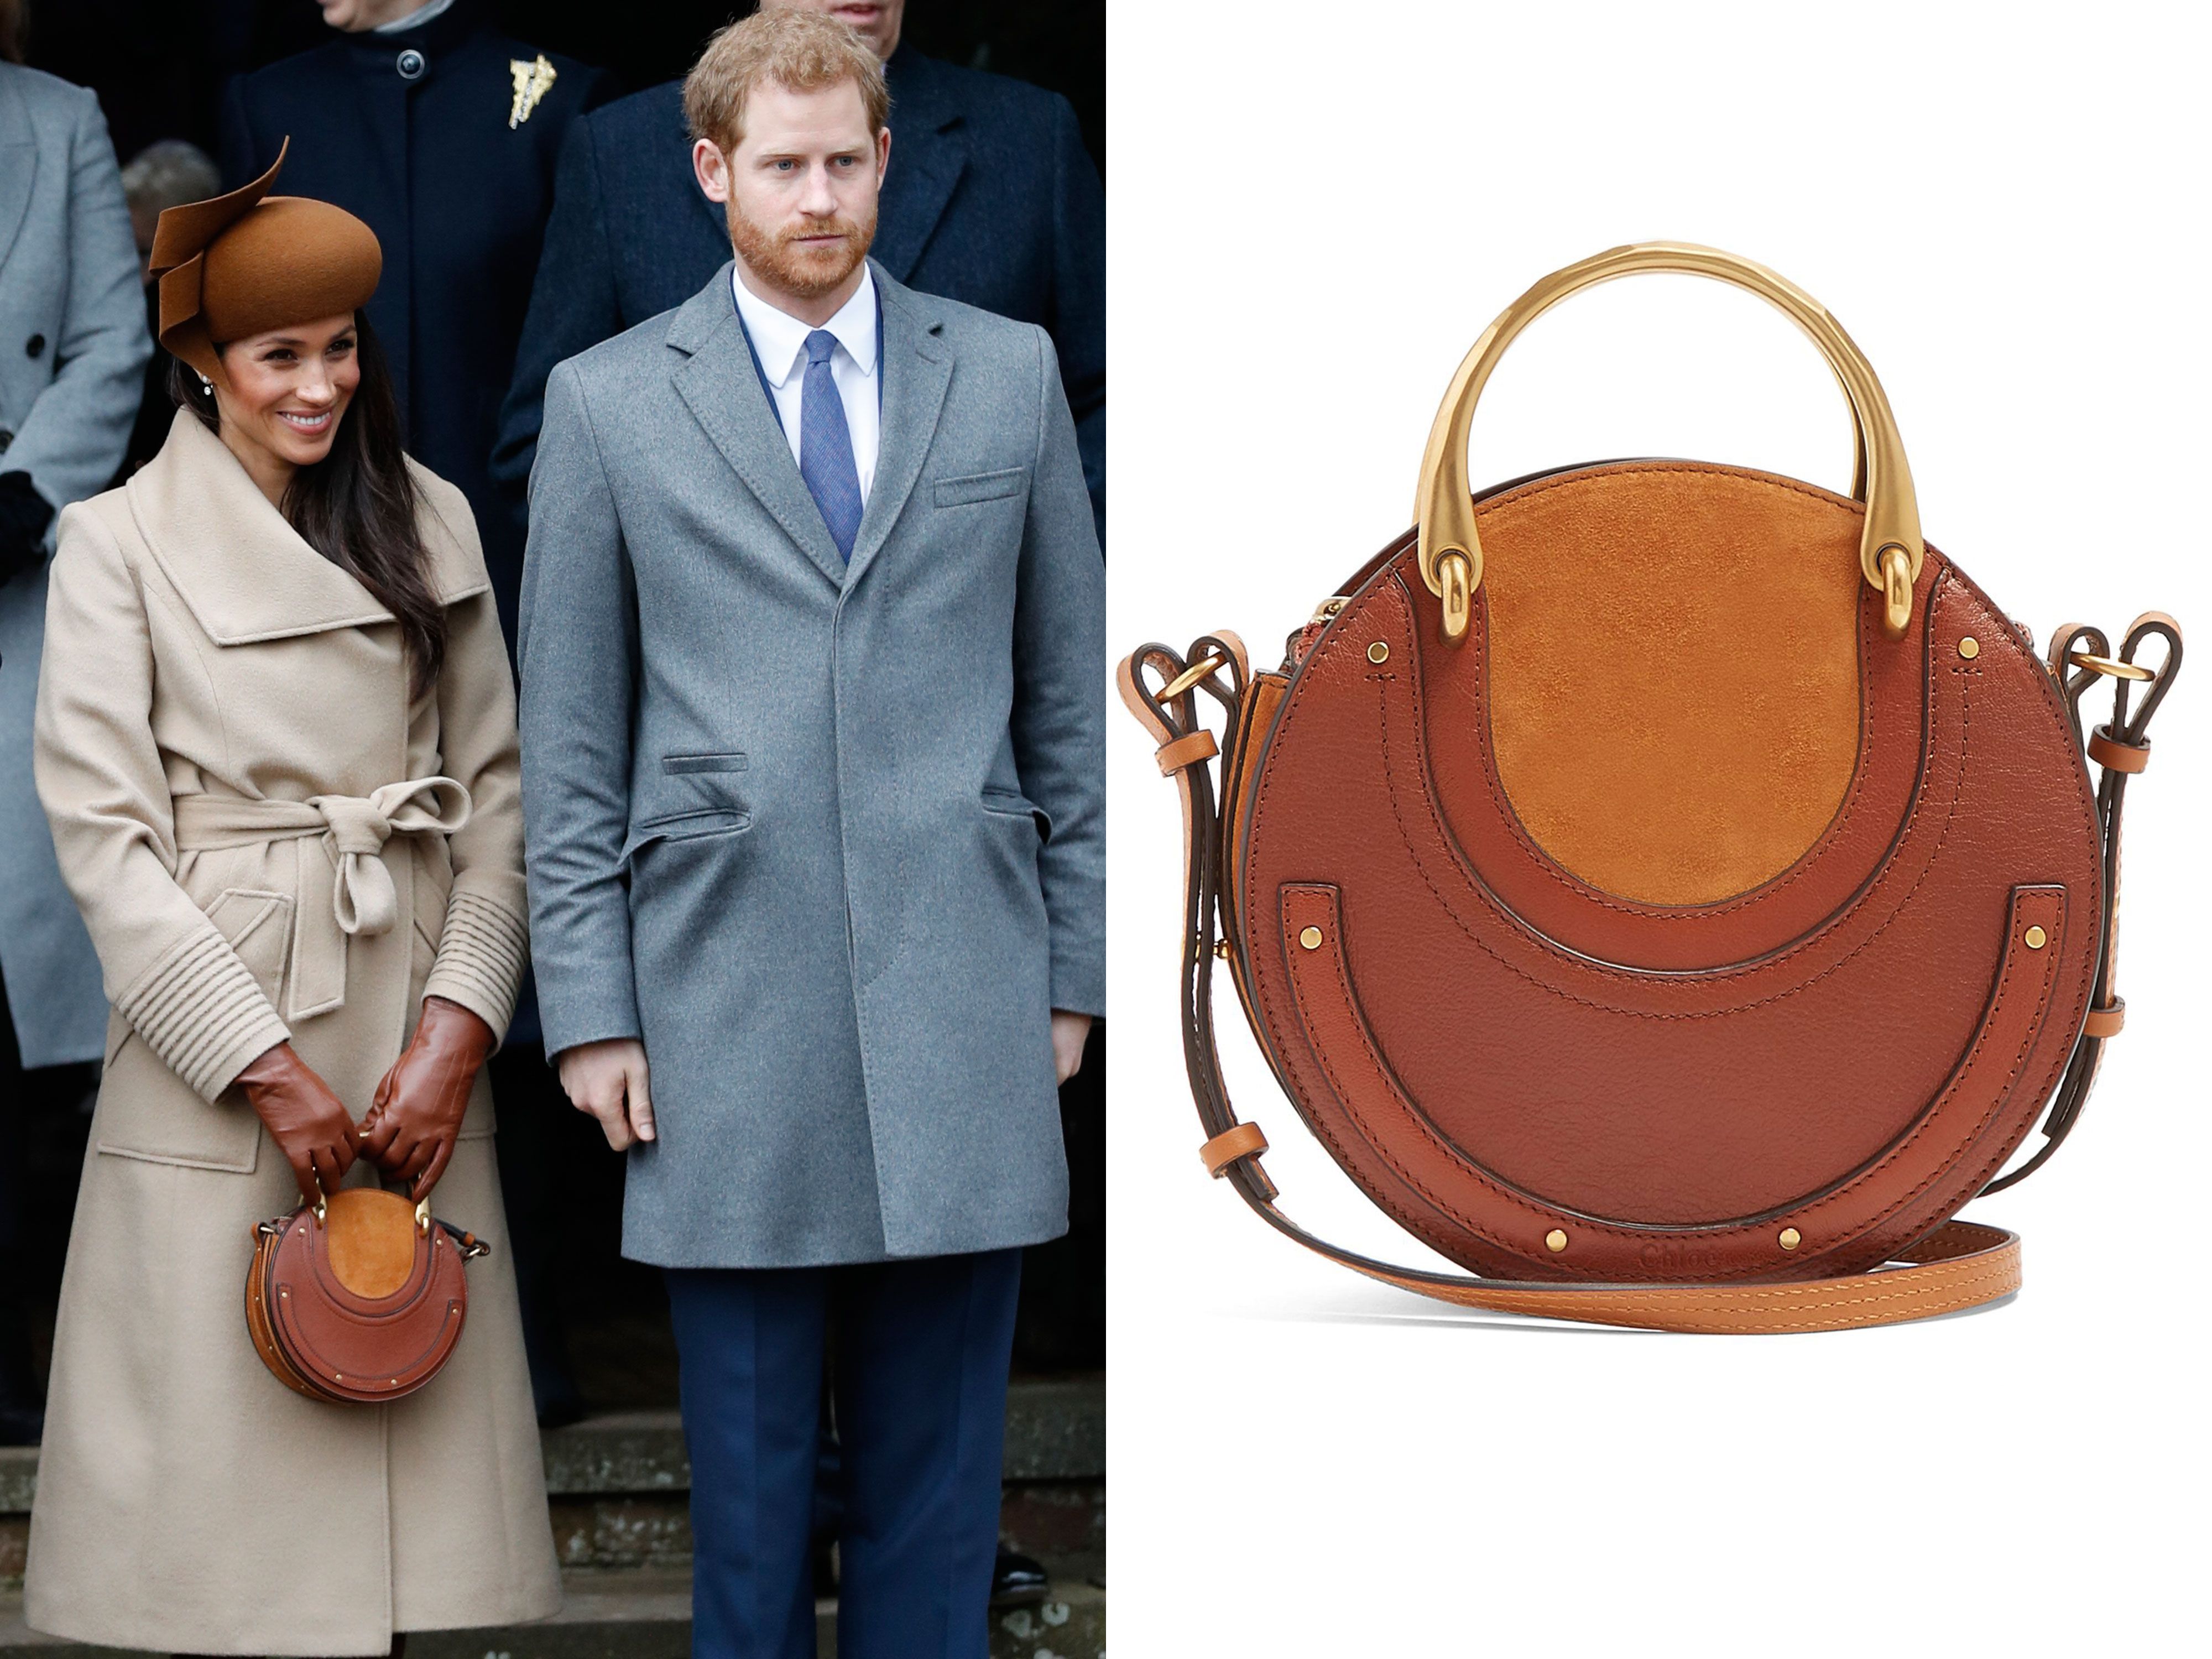 Where to buy Meghan Markle's handbags – Duchess of Sussex's bags